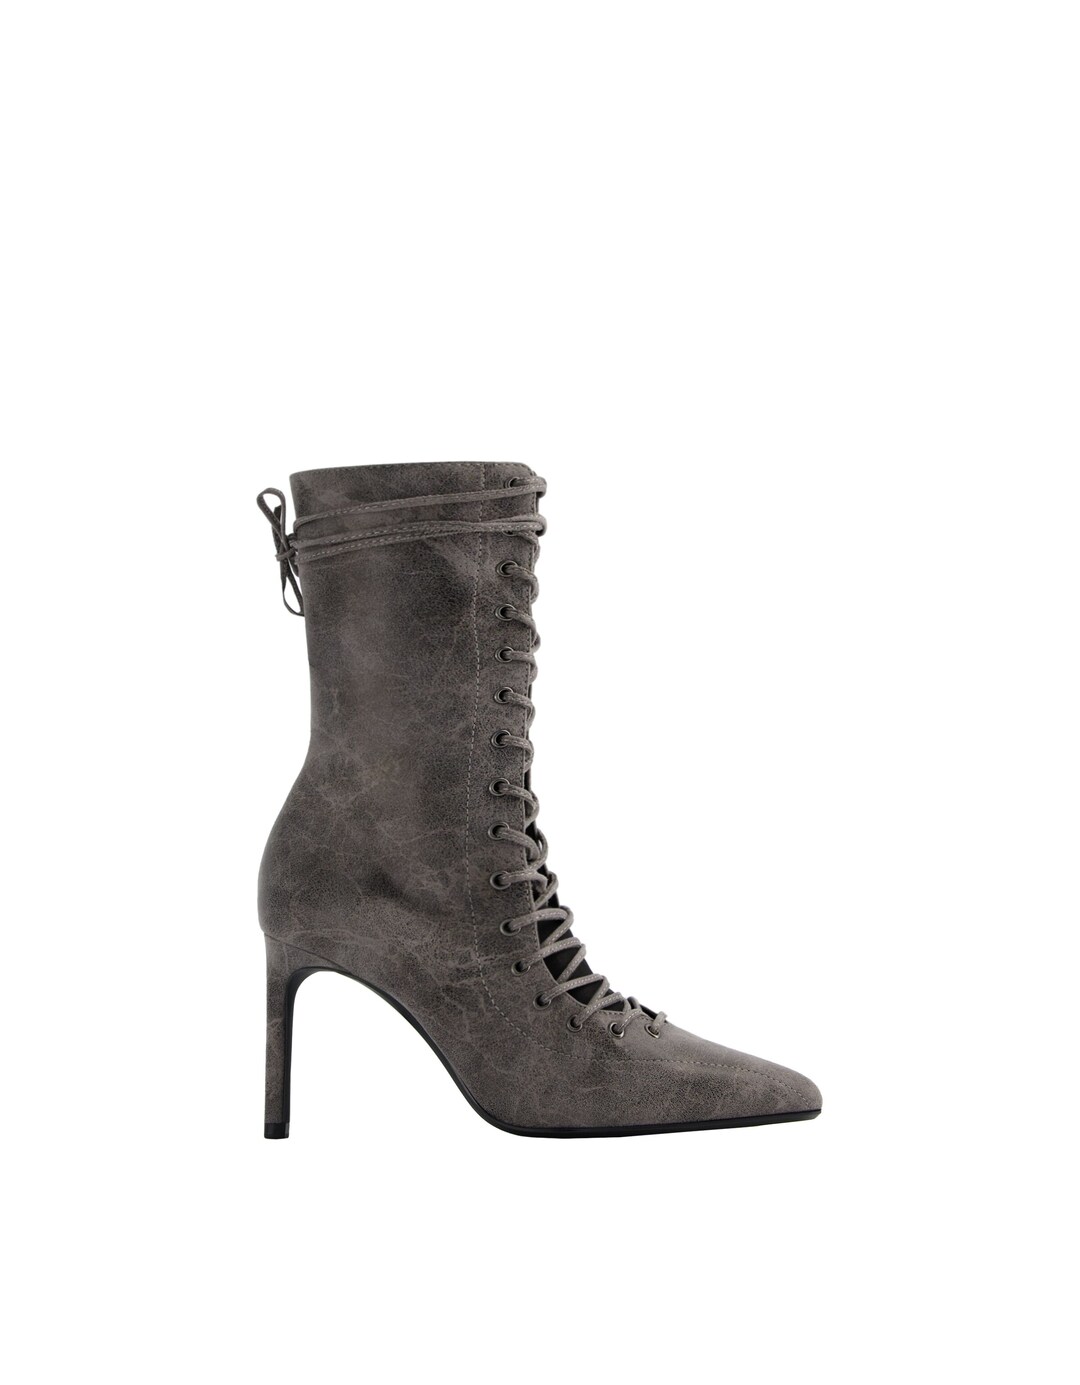 Lace-up stiletto heel zipper ankle boots